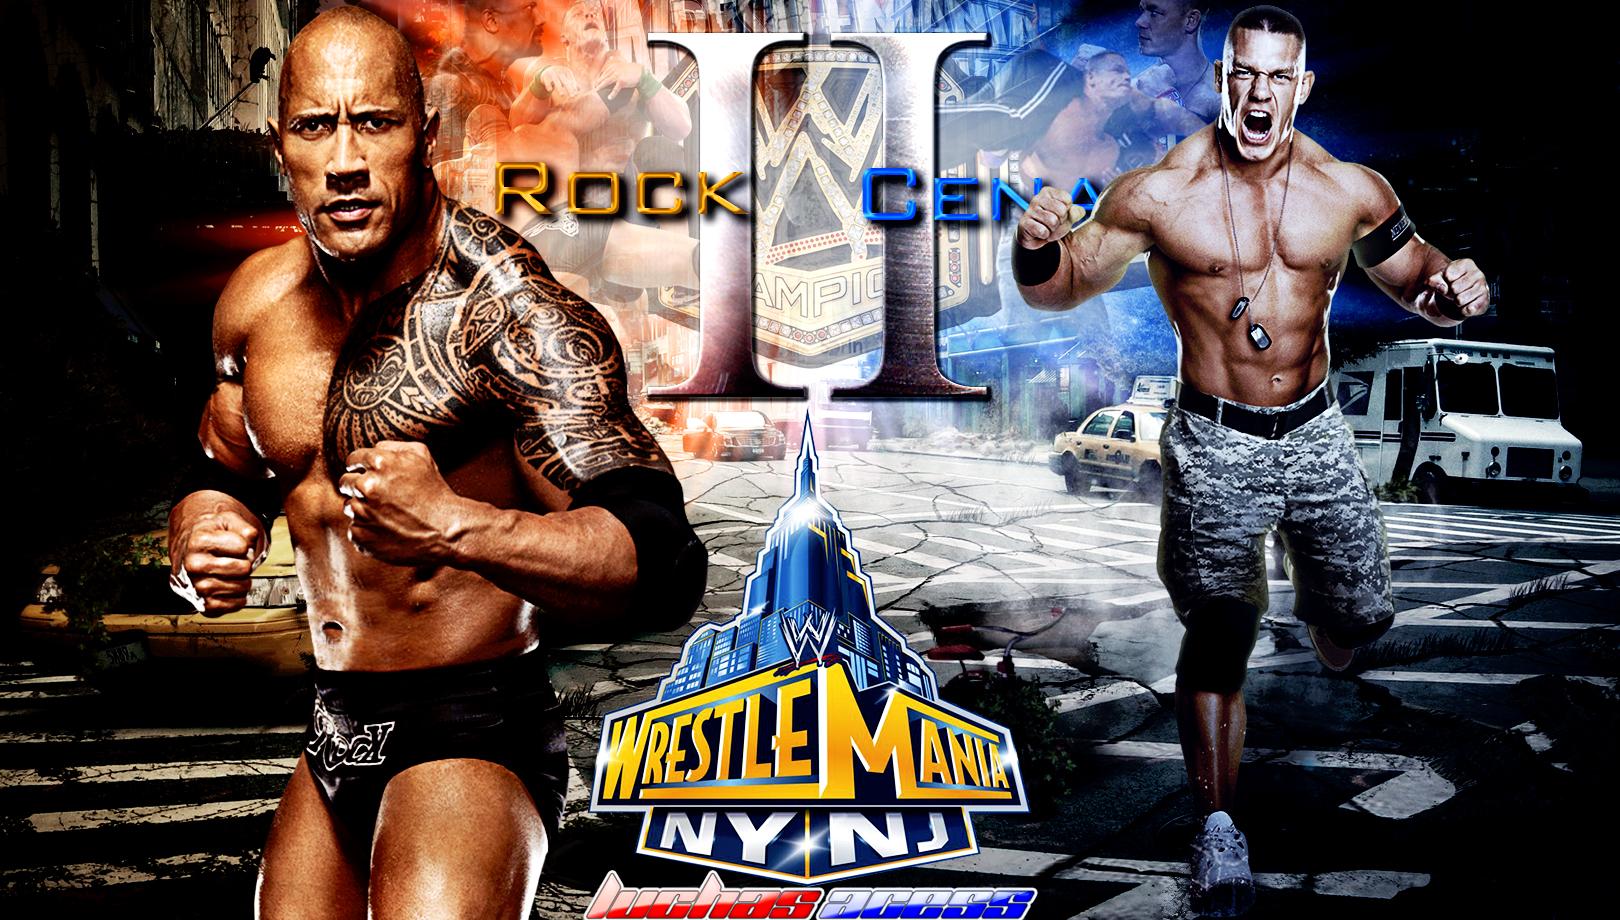 WrestleMania 29 Wallpapers - Top Free WrestleMania 29 Backgrounds ...